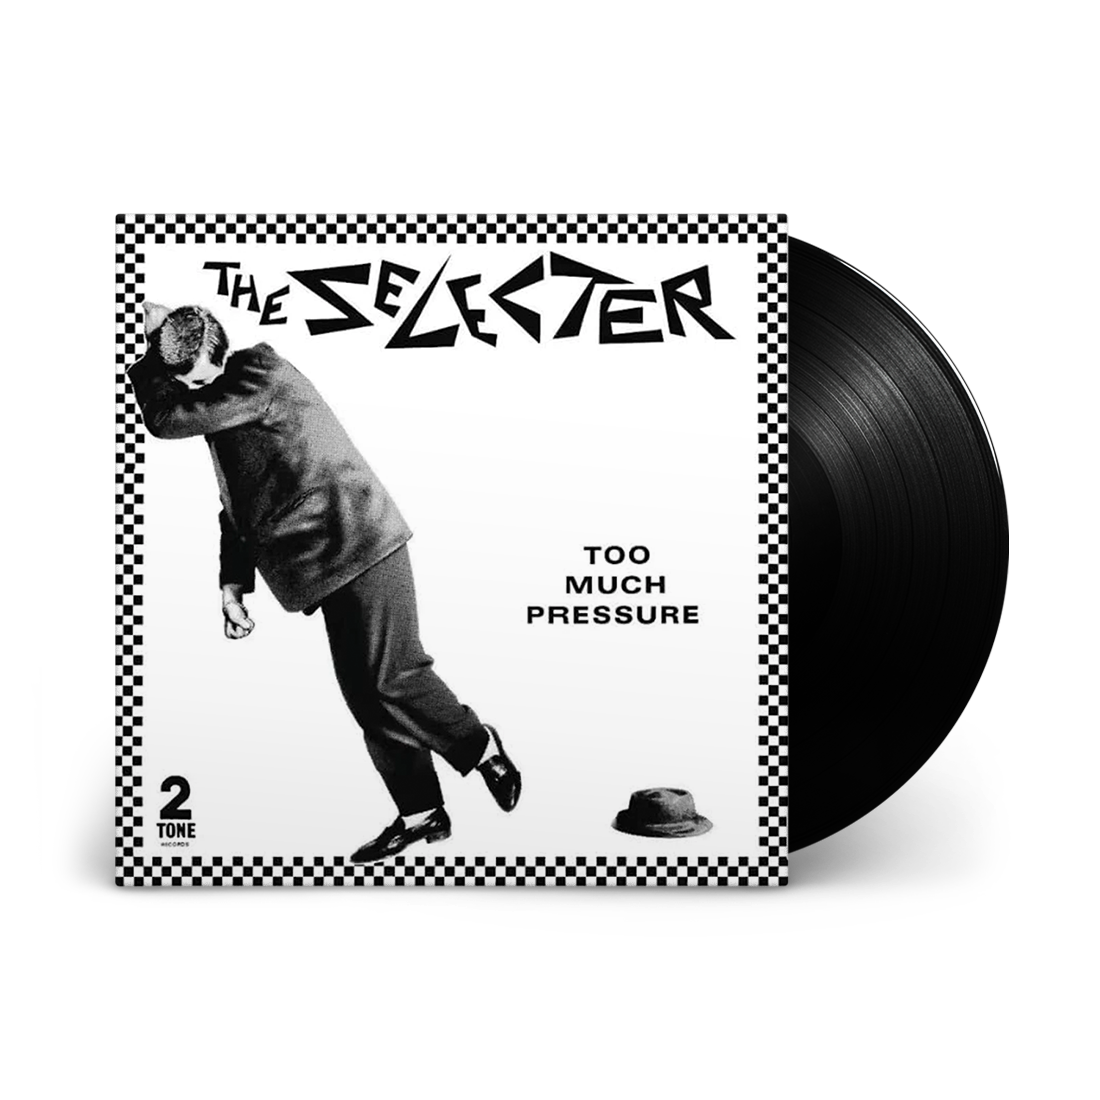 The Selecter - Too Much Pressure (40th Anniversary Edition): Vinyl LP